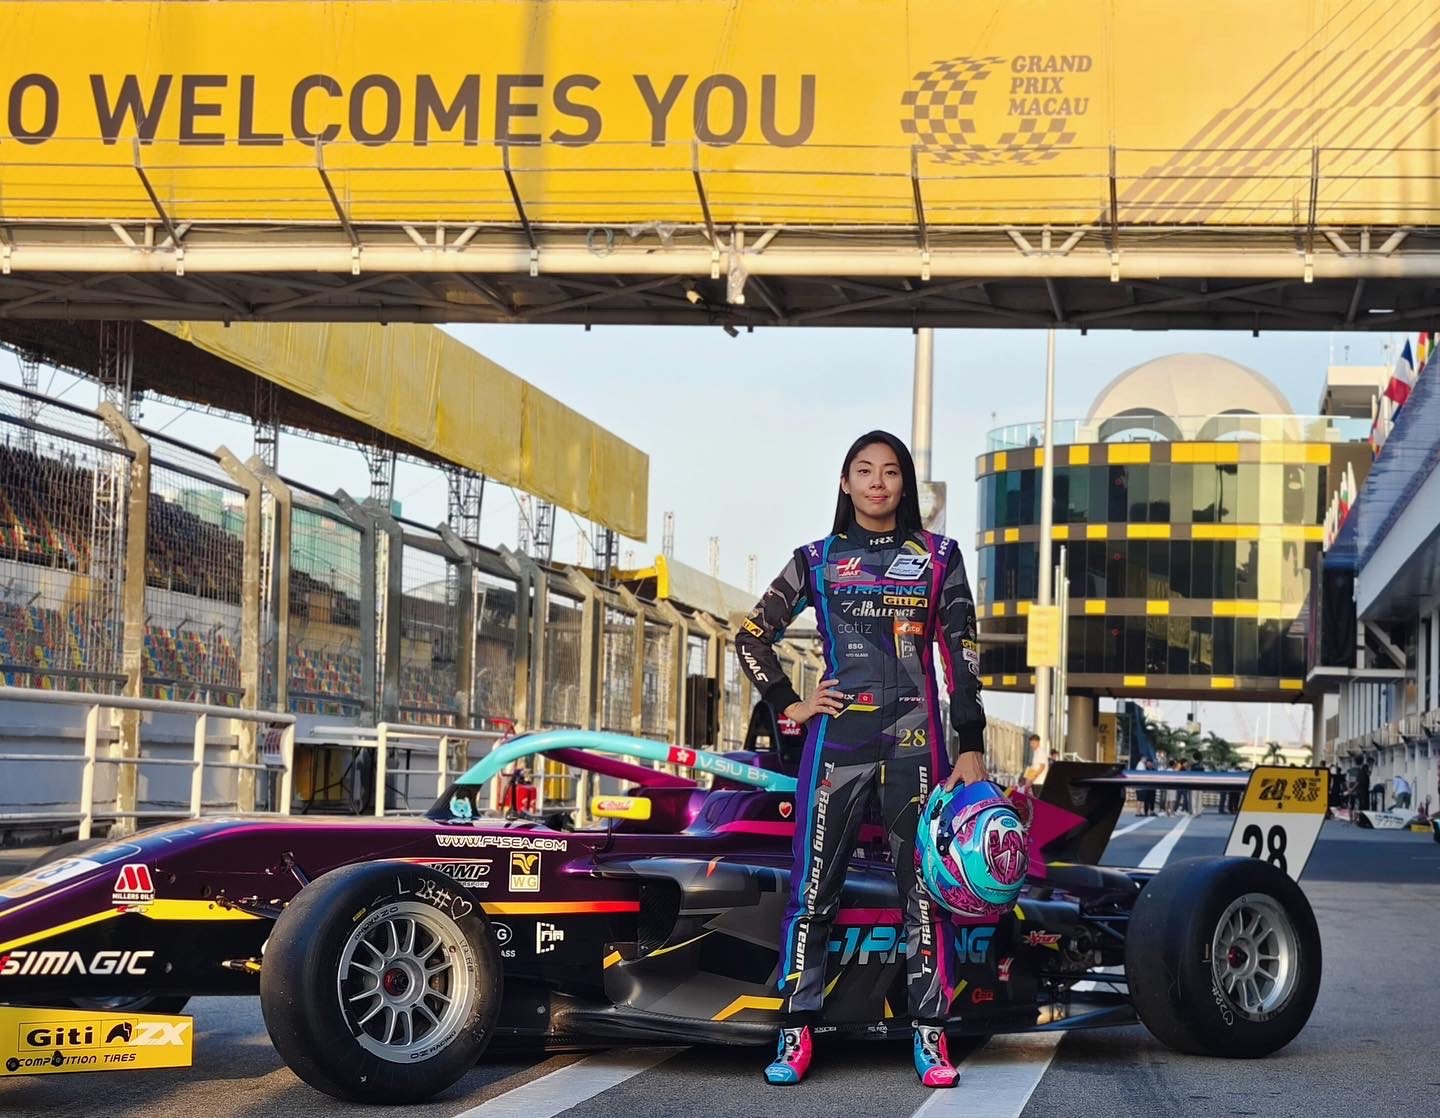 Vivian Siu at the 2023 Macau Grand Prix, where she became the first woman driver to finish the event in Formula 4. The Hong Kong native opens up about the “profound pain” she went through, and using it as motivation. Photo: Vivian Siu